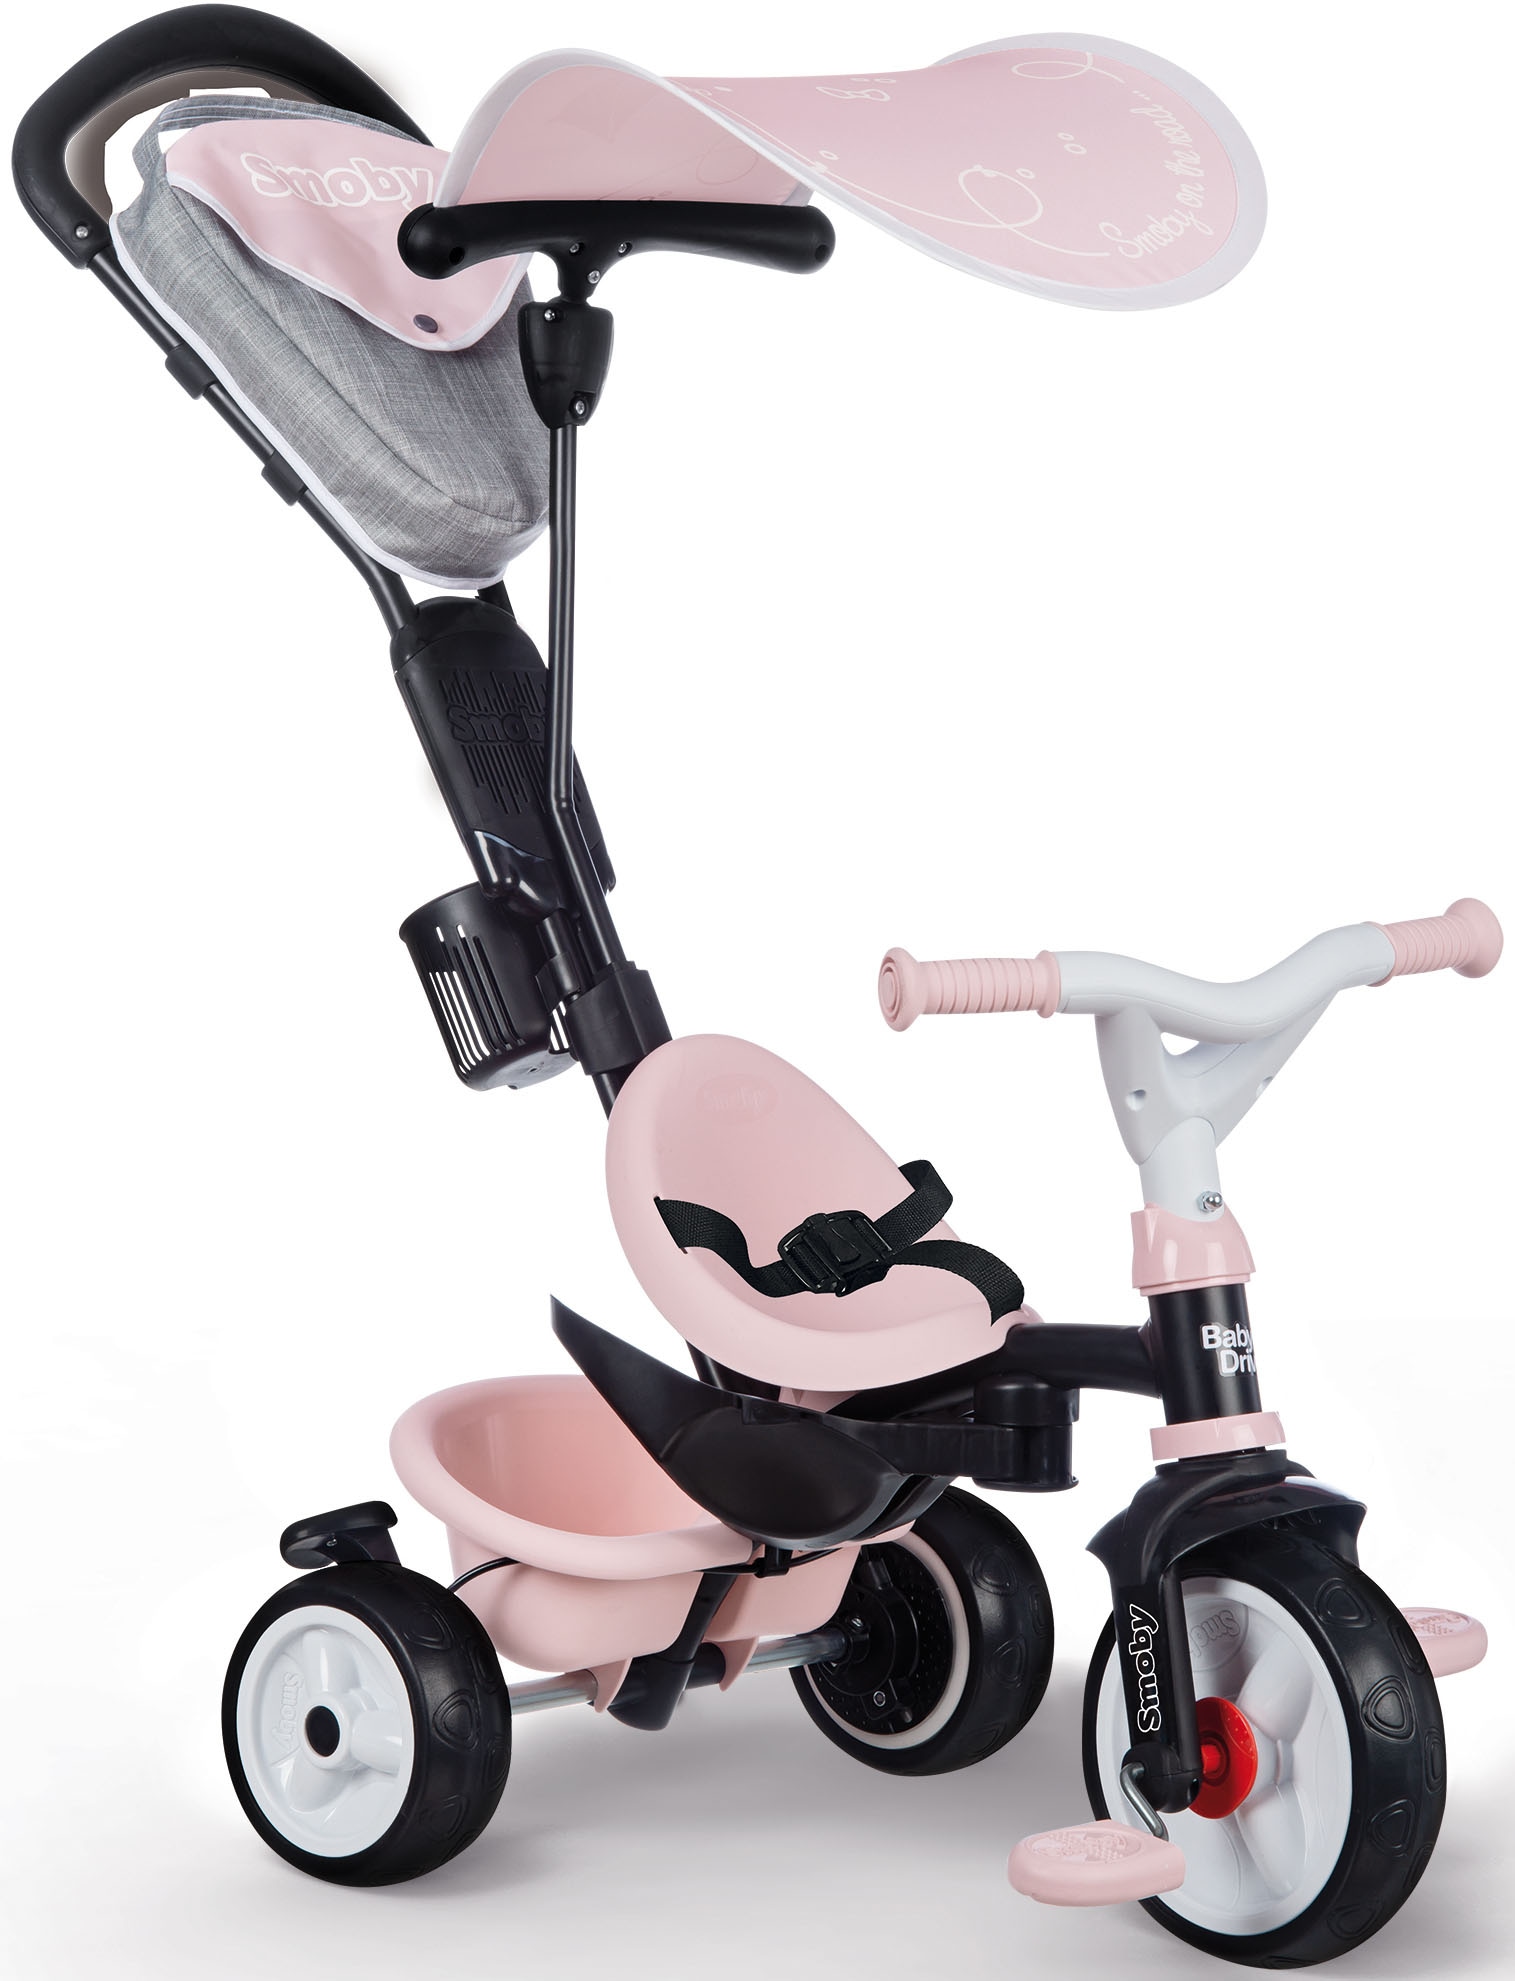 Made Dreirad Plus, Driver kaufen in Smoby rosa«, online Europe »Baby